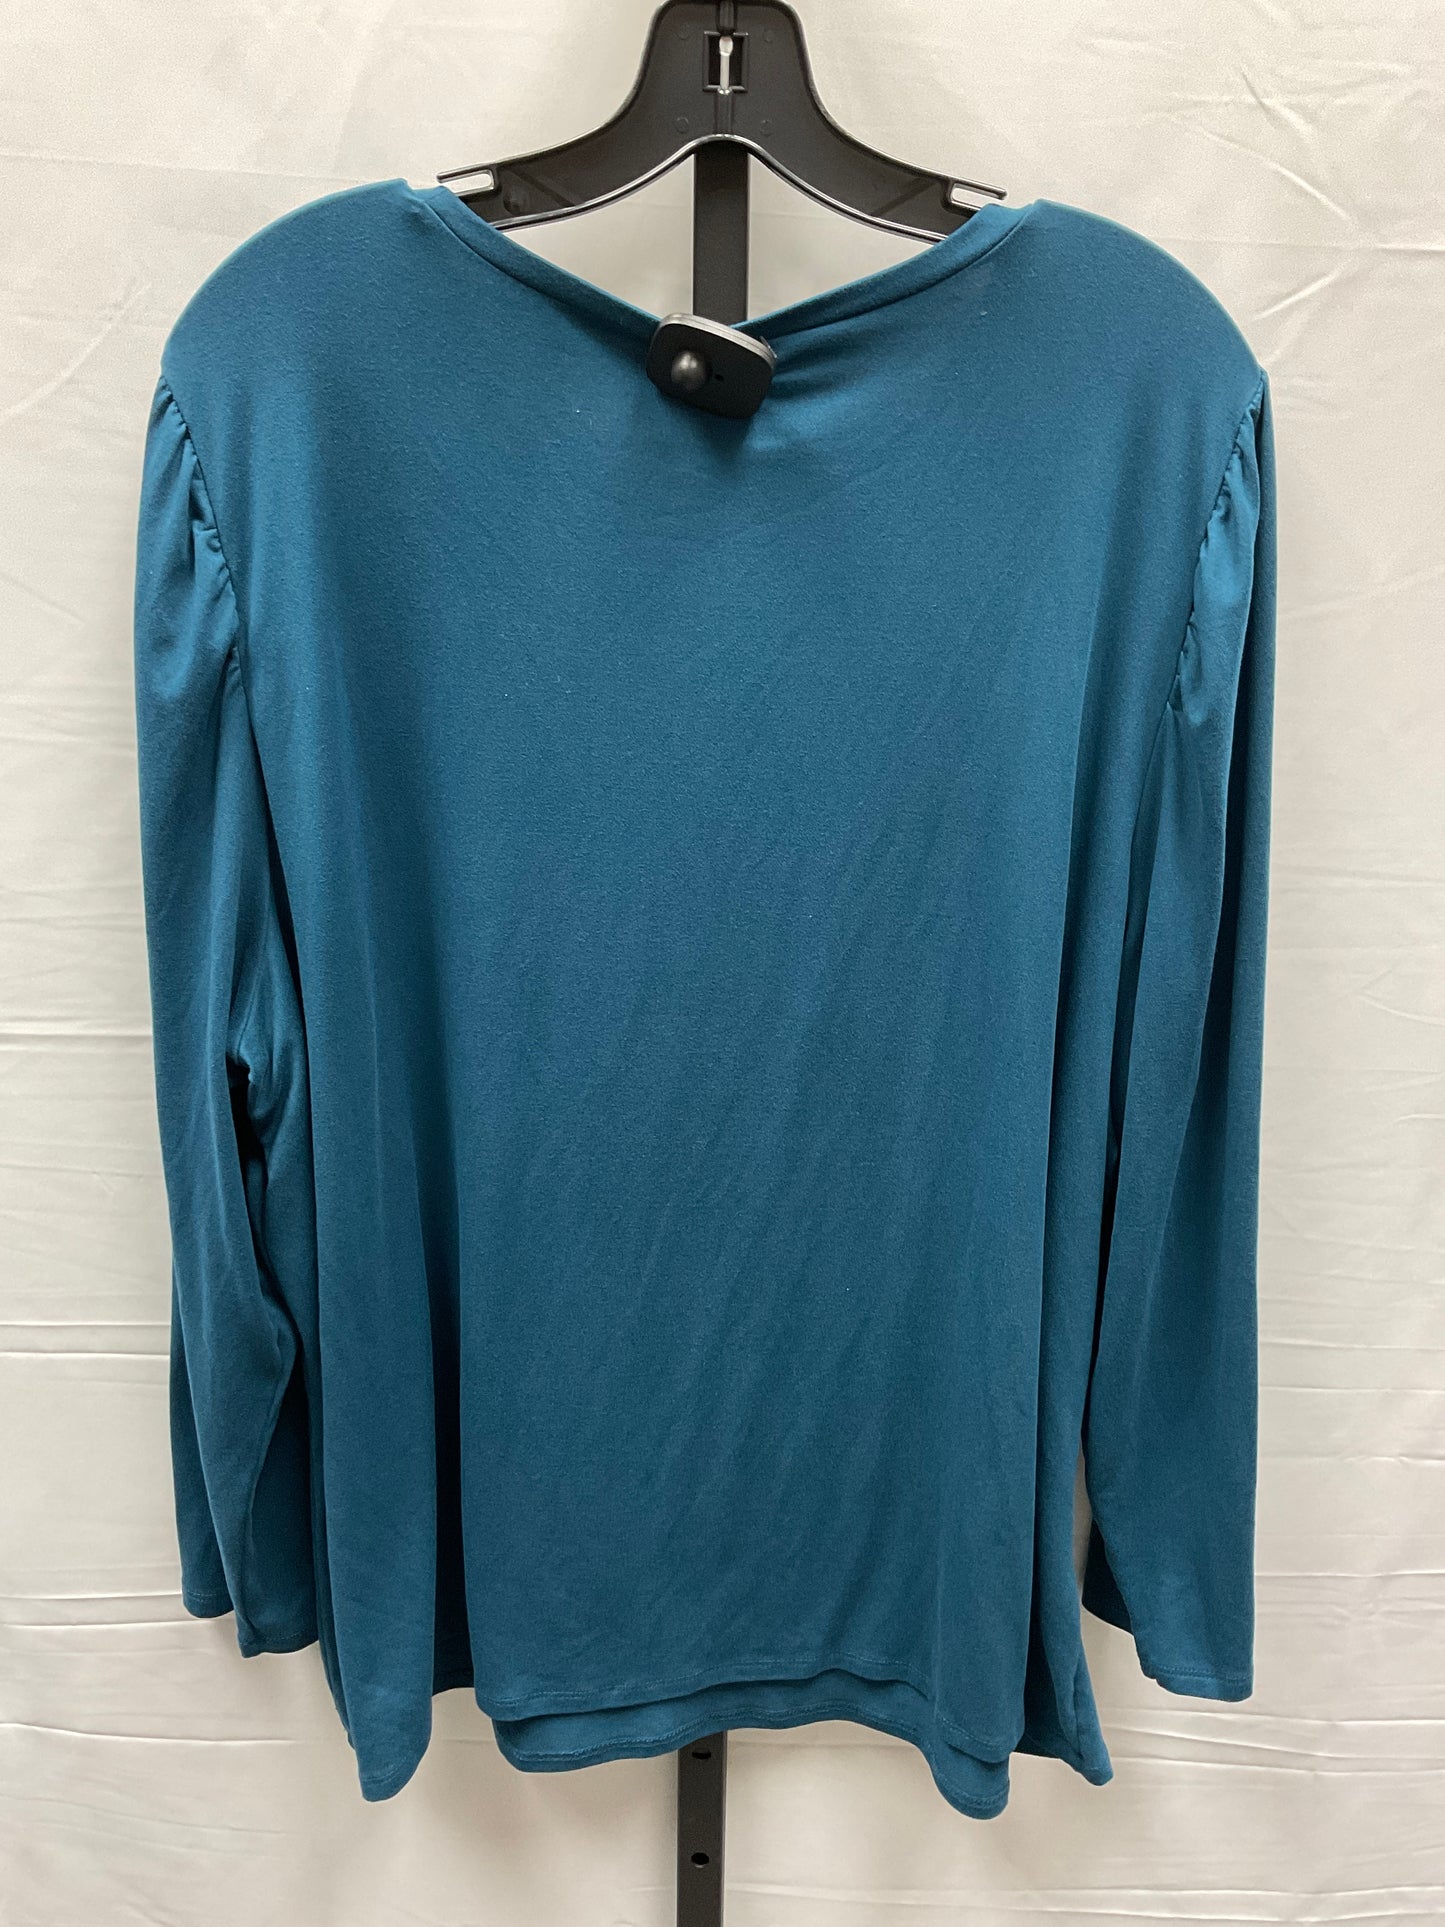 Top Long Sleeve By Lane Bryant  Size: 4x